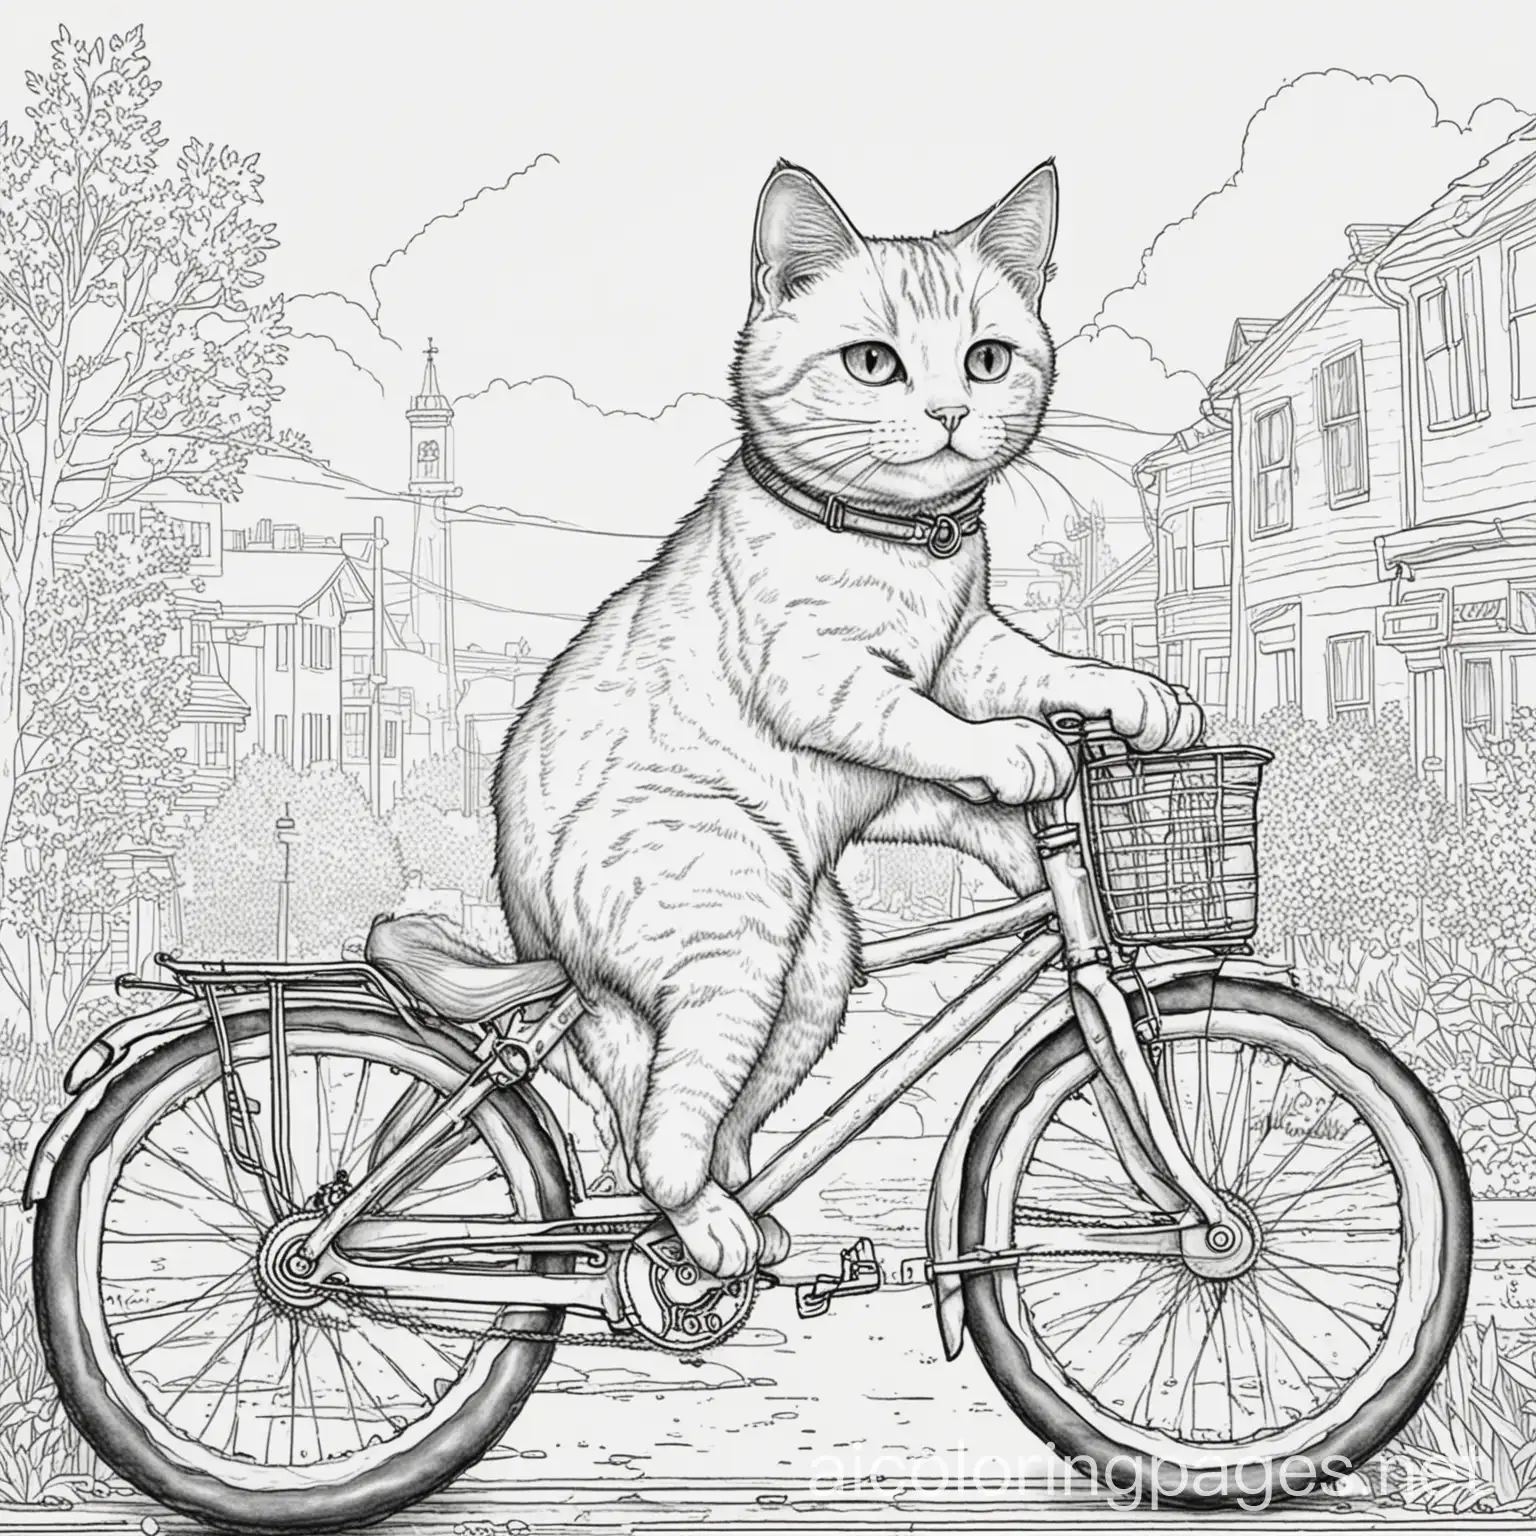 Cat-Riding-Bike-Coloring-Page-Portland-Adventure-for-Kids